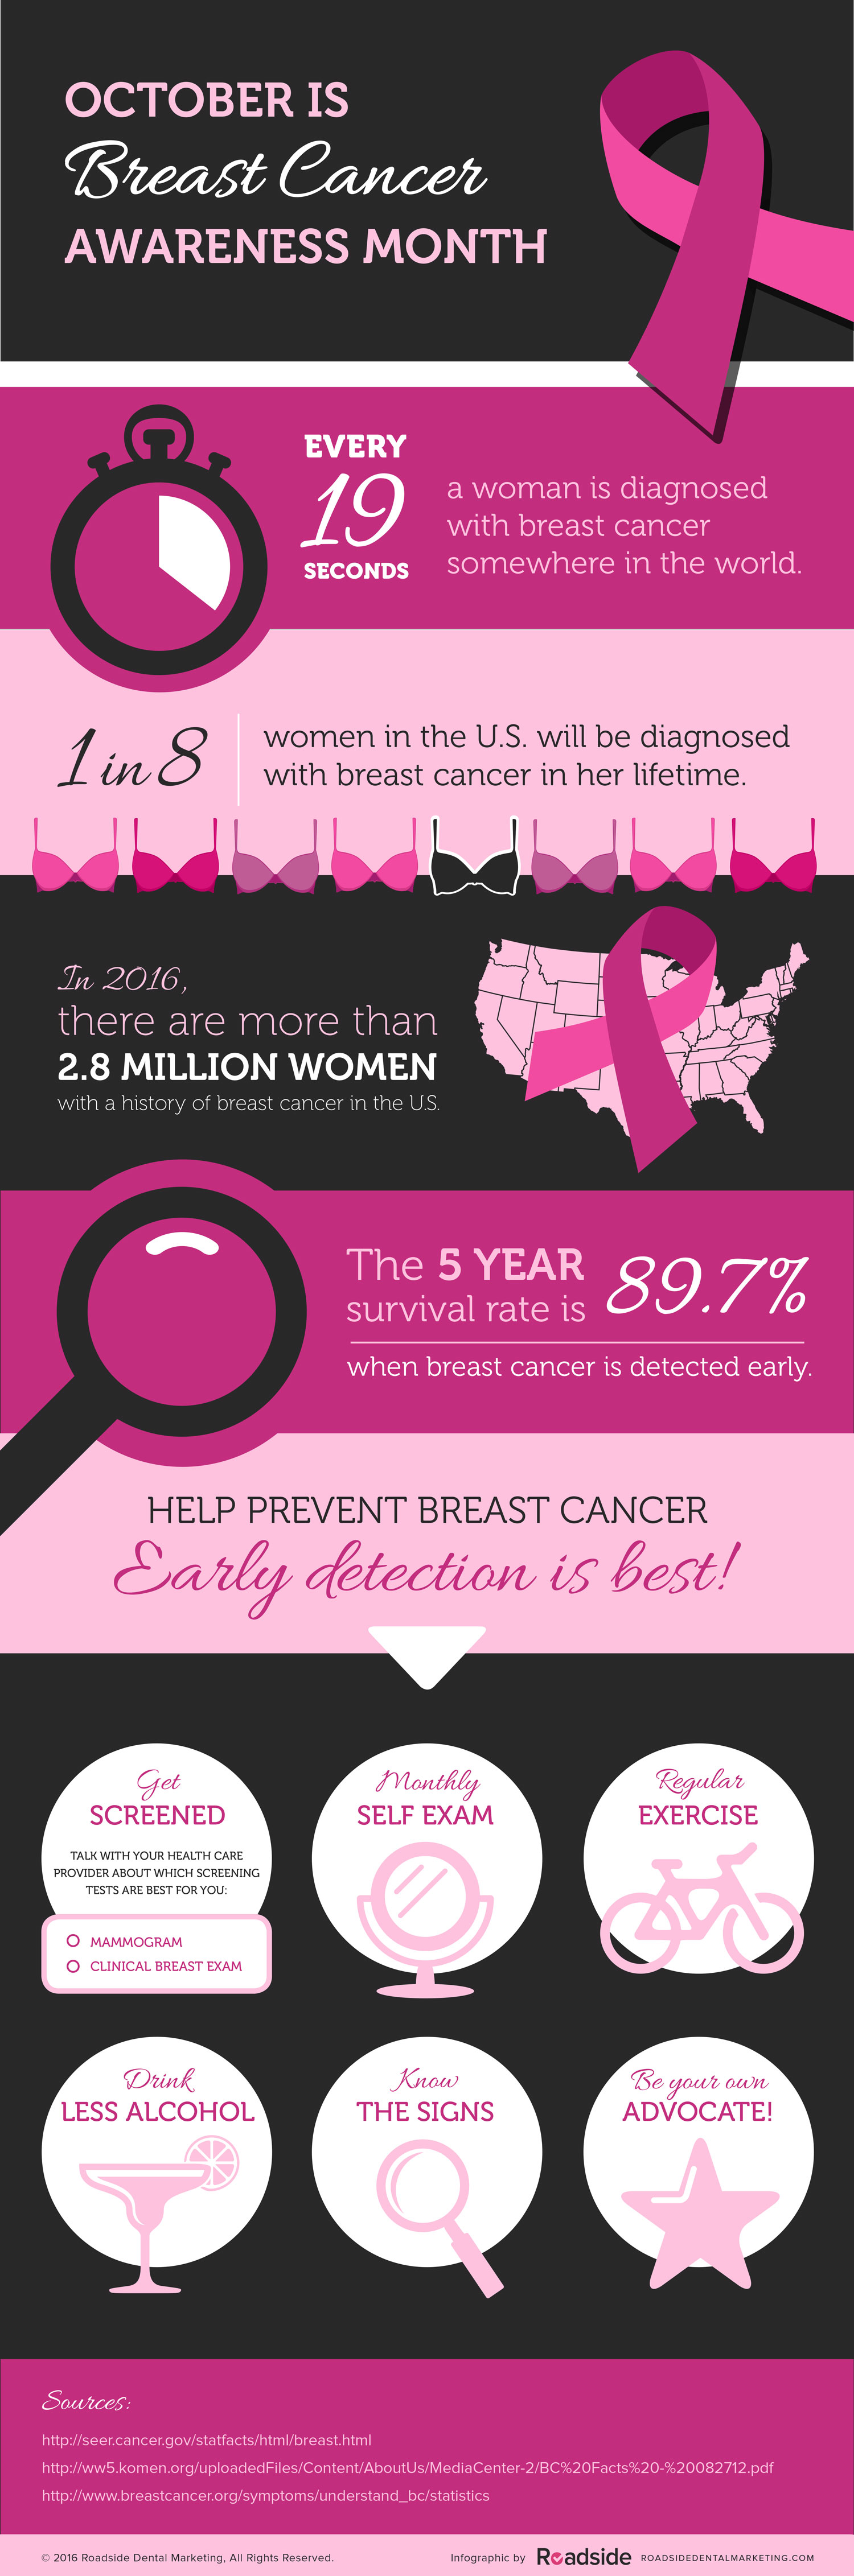 October is Breast Cancer Awareness Month - learn the facts in this infographic.